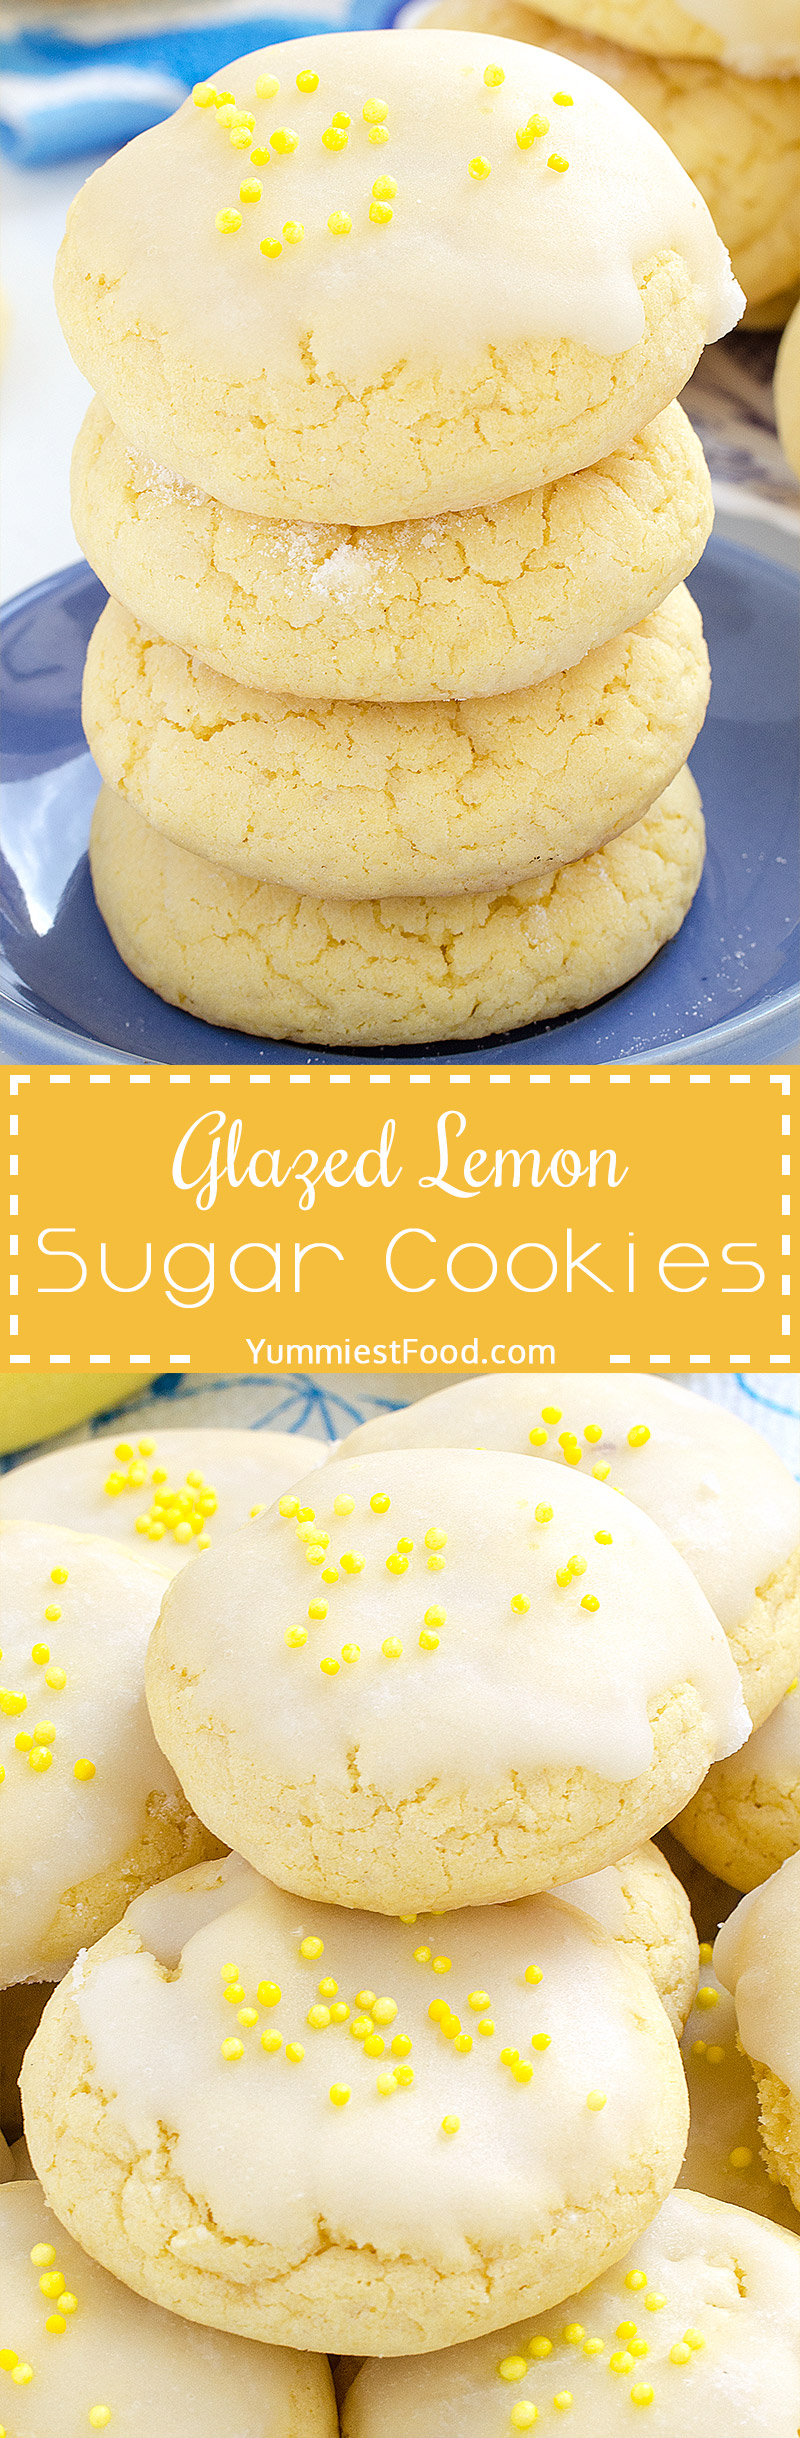 Glazed Lemon Sugar Cookies - so sweet, delicious and refreshing! Very easy and quick to make with only few ingredients!